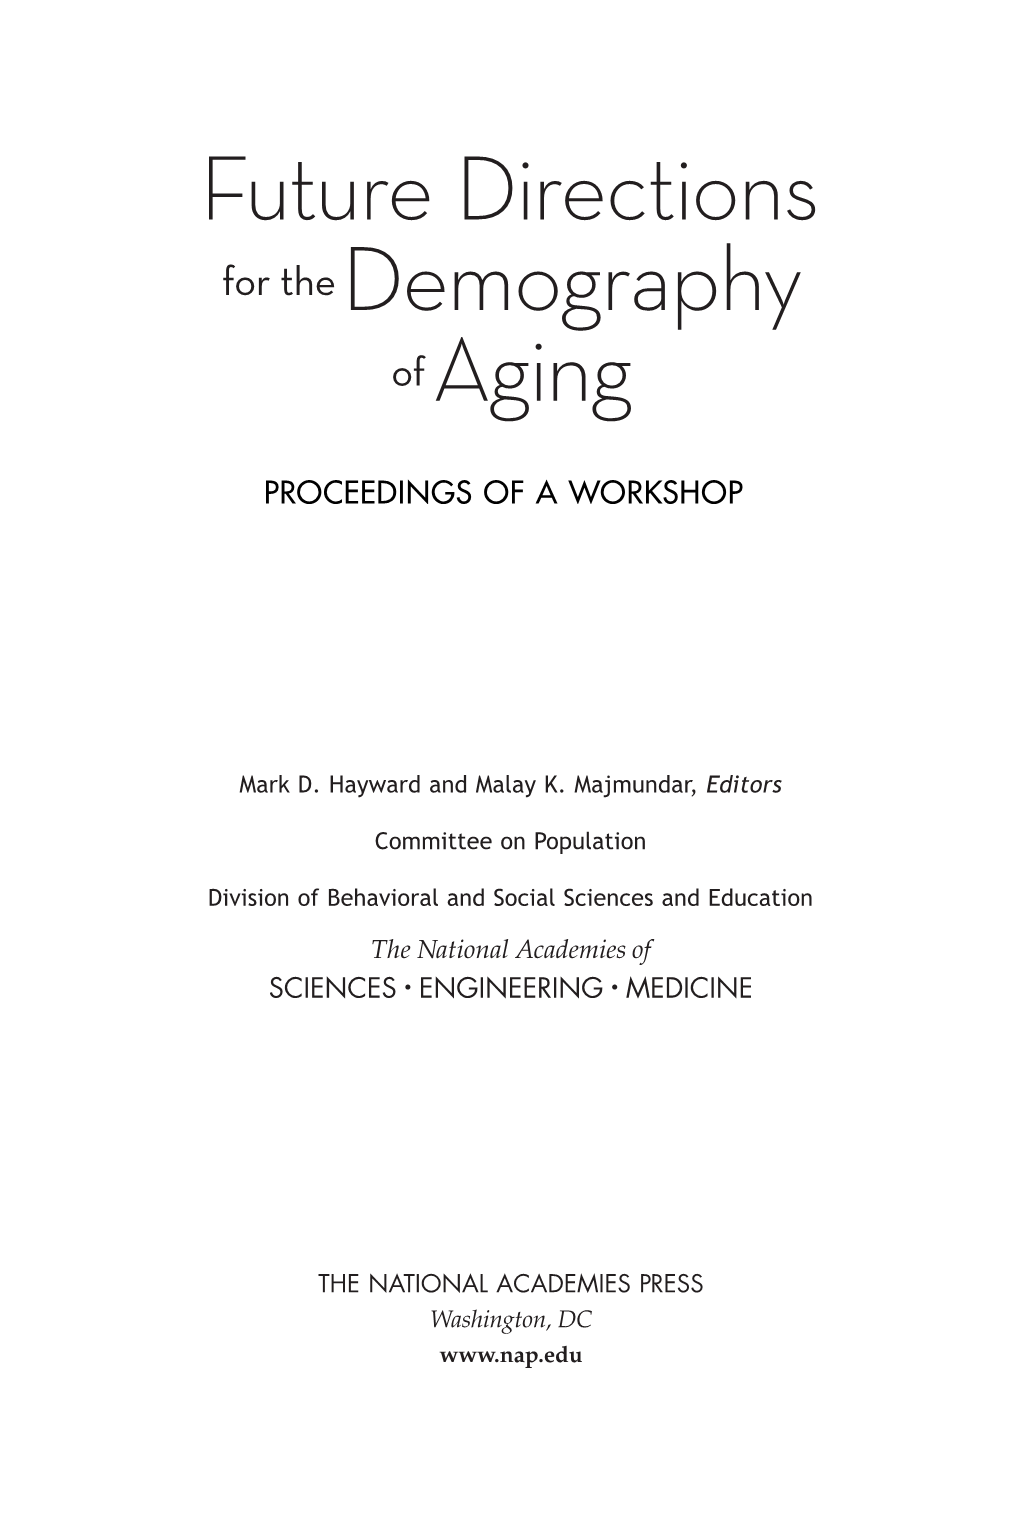 Future Directions for the Demography of Aging: Proceedings of a Workshop